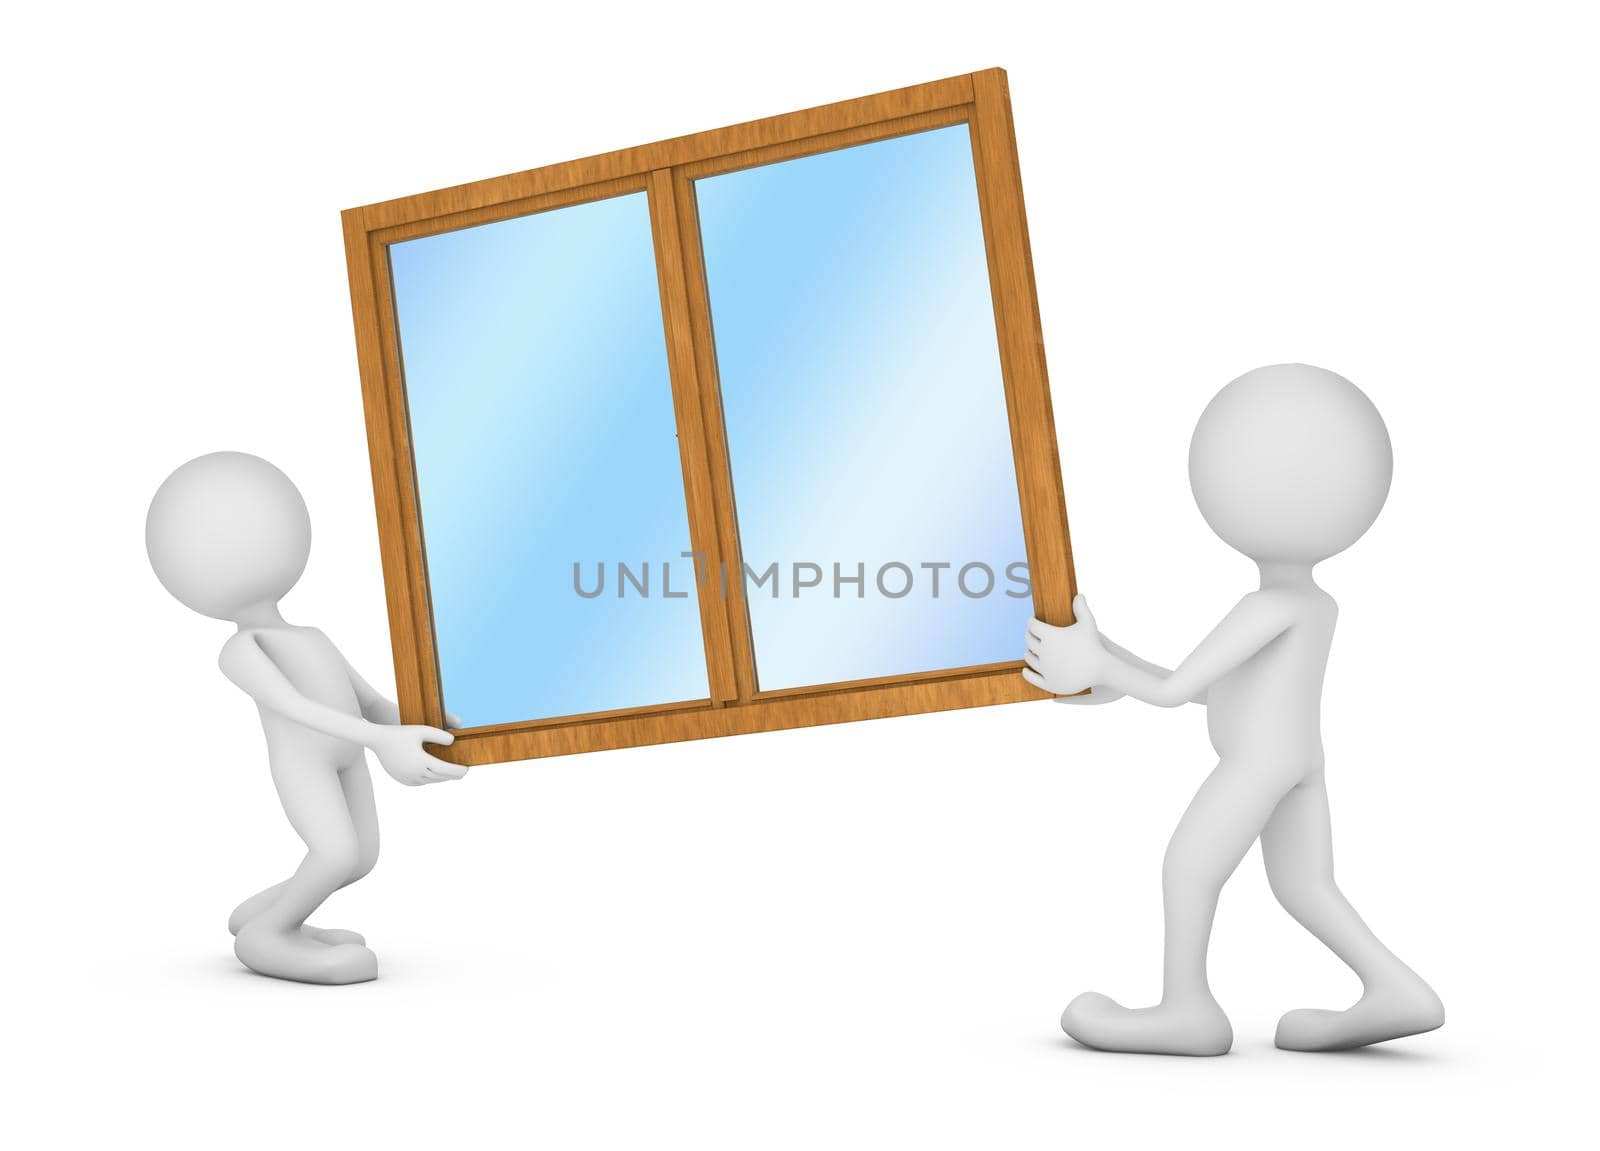 two people are holding a window 3d render